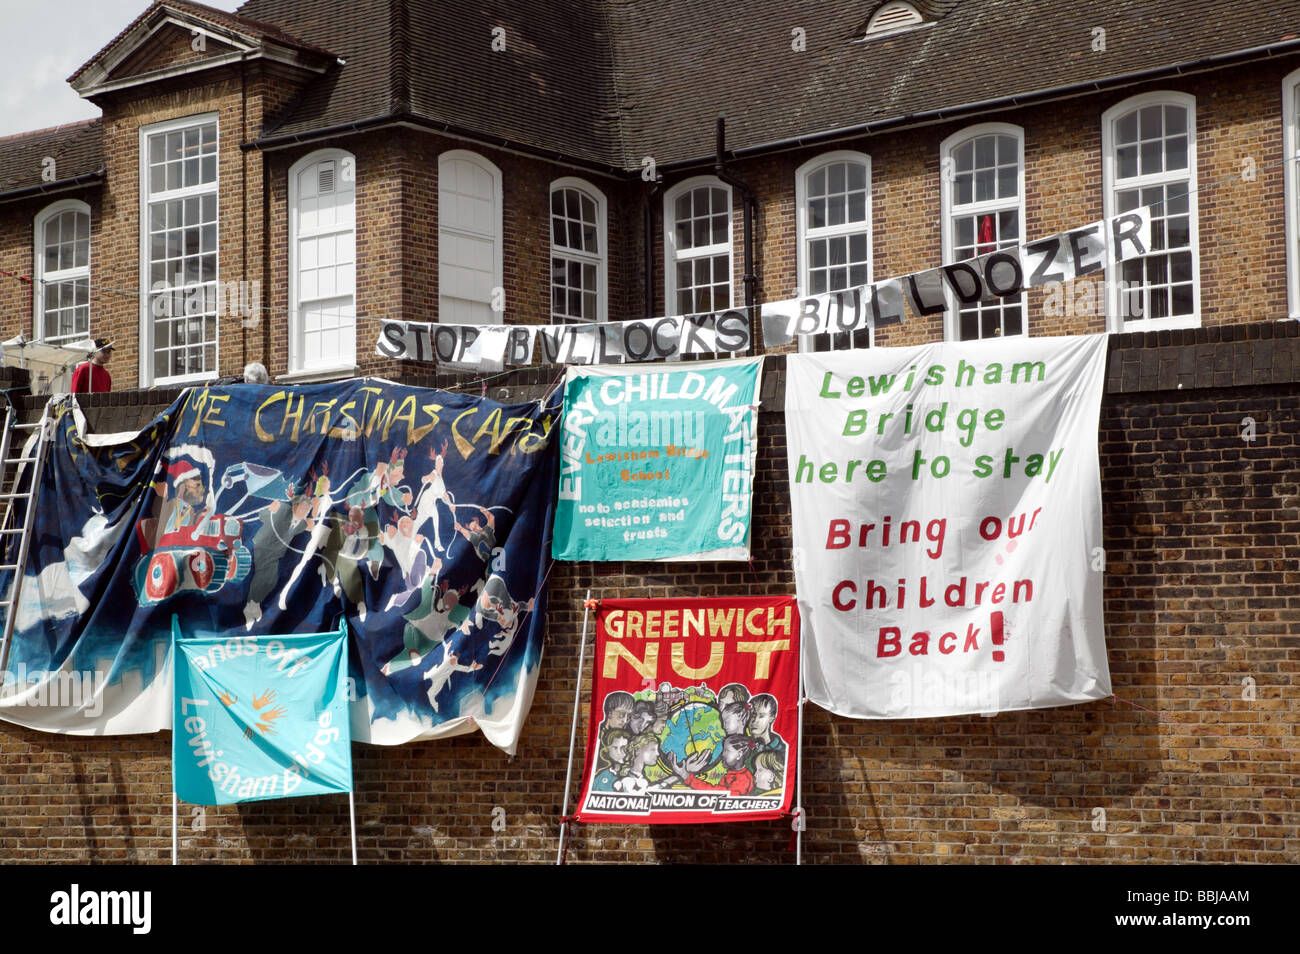 Banners against the demolition of Lewisham Bridge Primary School  during a roof-top protest and occupation of the school Stock Photo